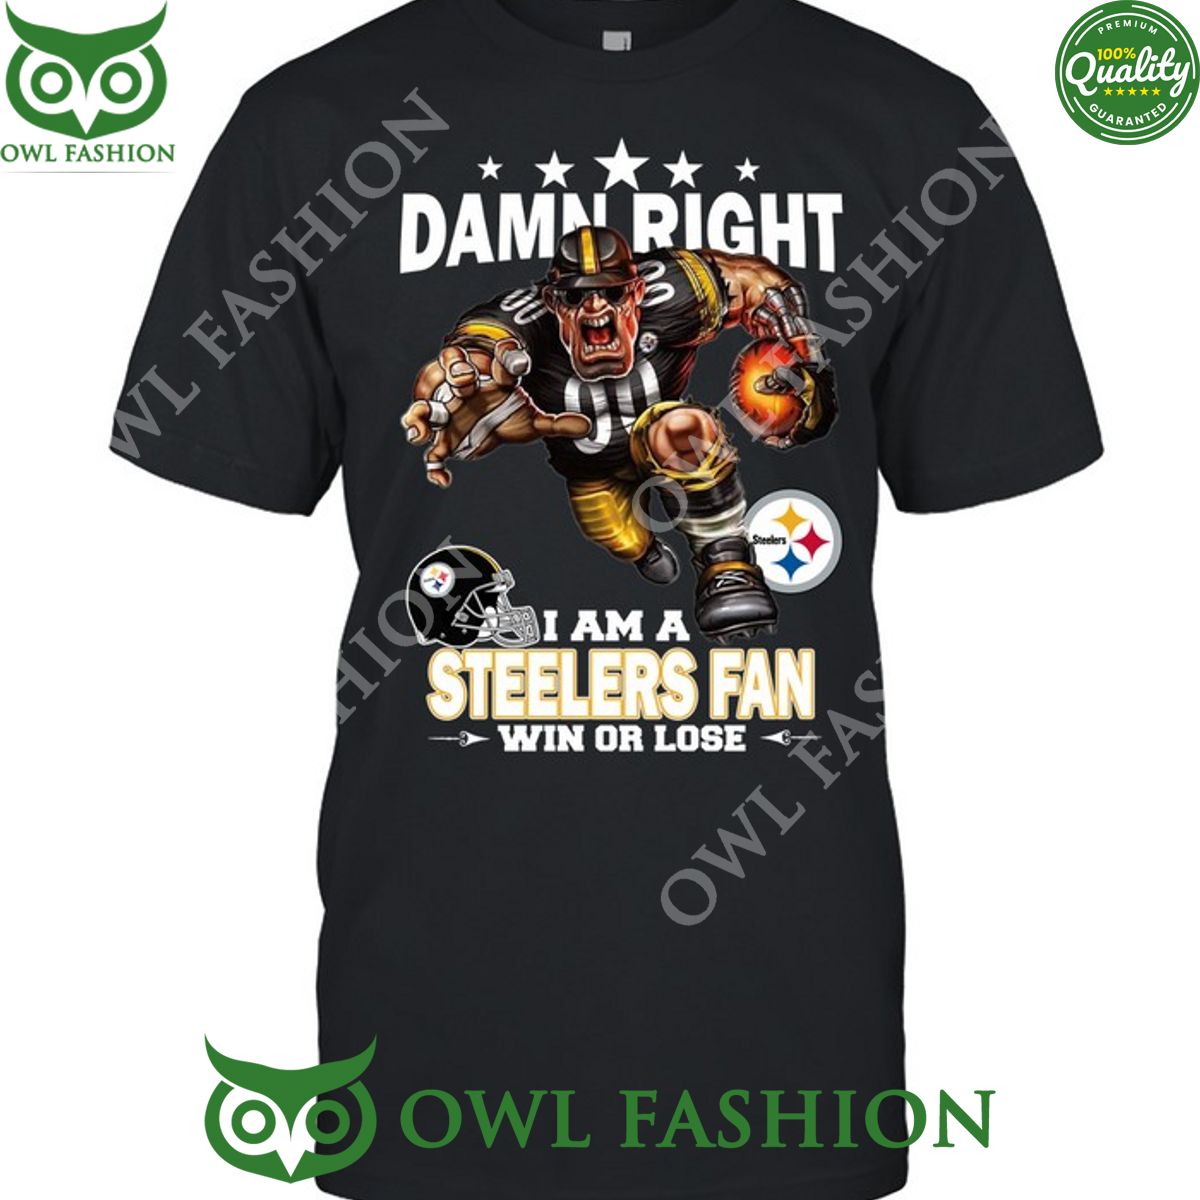 Damn Right Pittsburgh Steelers NFL Fan Win or lose t shirt